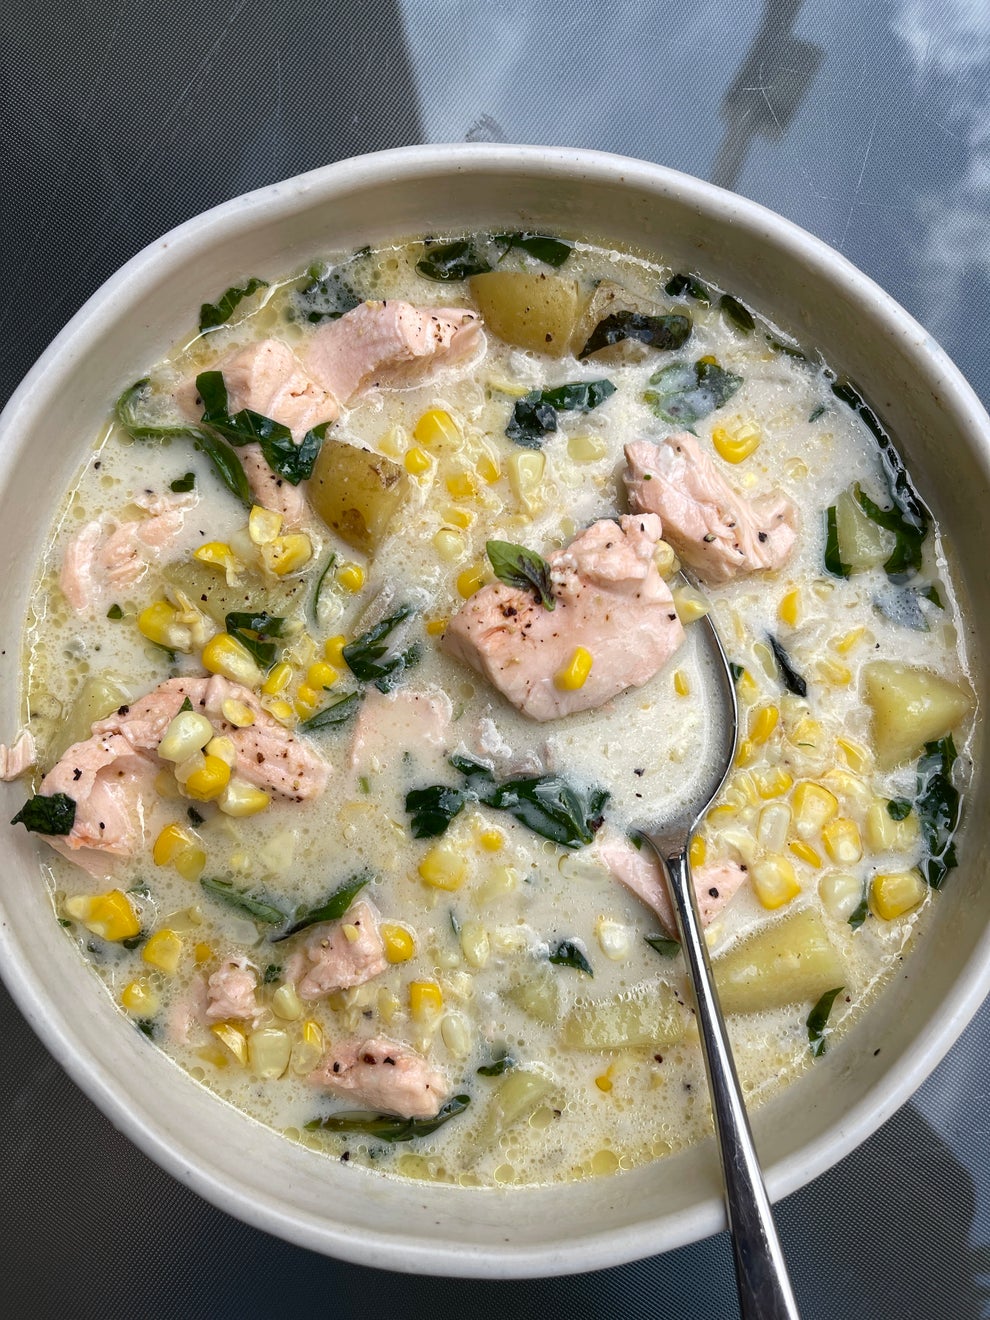 13 Soup Recipes We'll Be Eating All Winter Long